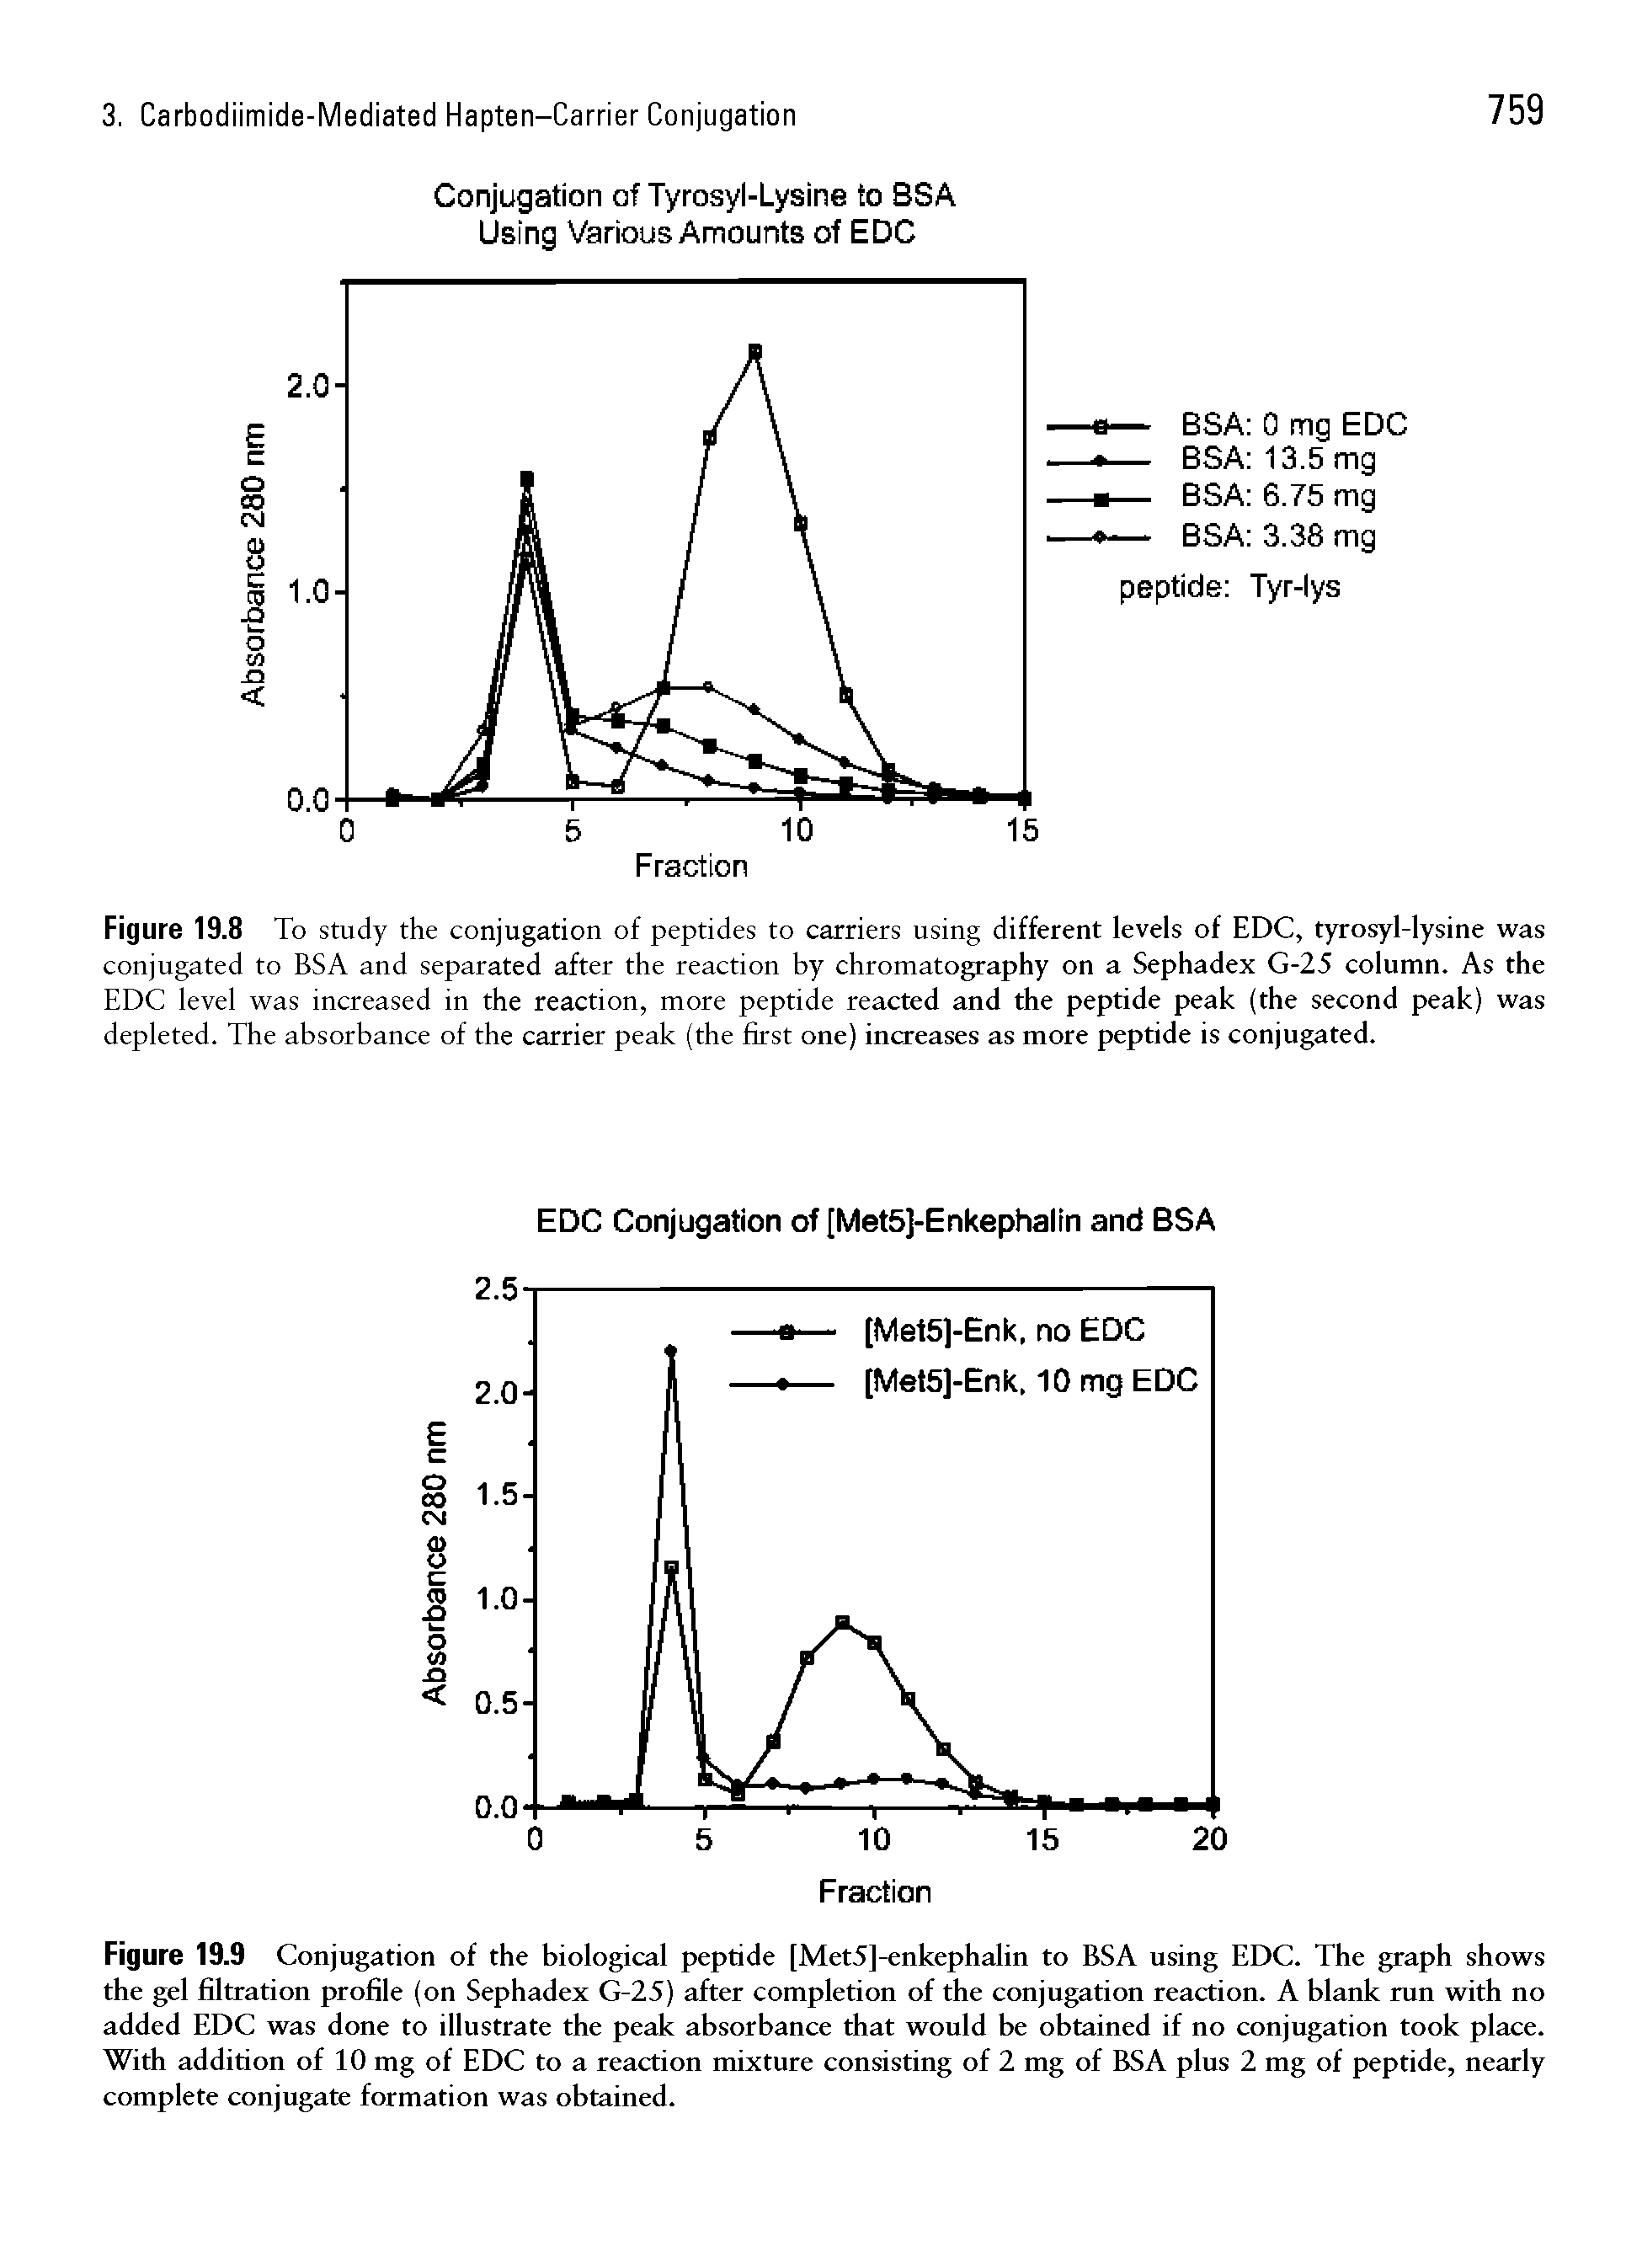 Figure 19.8 To study the conjugation of peptides to carriers using different levels of EDC, tyrosyl-lysine was conjugated to BSA and separated after the reaction by chromatography on a Sephadex G-25 column. As the EDC level was increased in the reaction, more peptide reacted and the peptide peak (the second peak) was depleted. The absorbance of the carrier peak (the first one) increases as more peptide is conjugated.